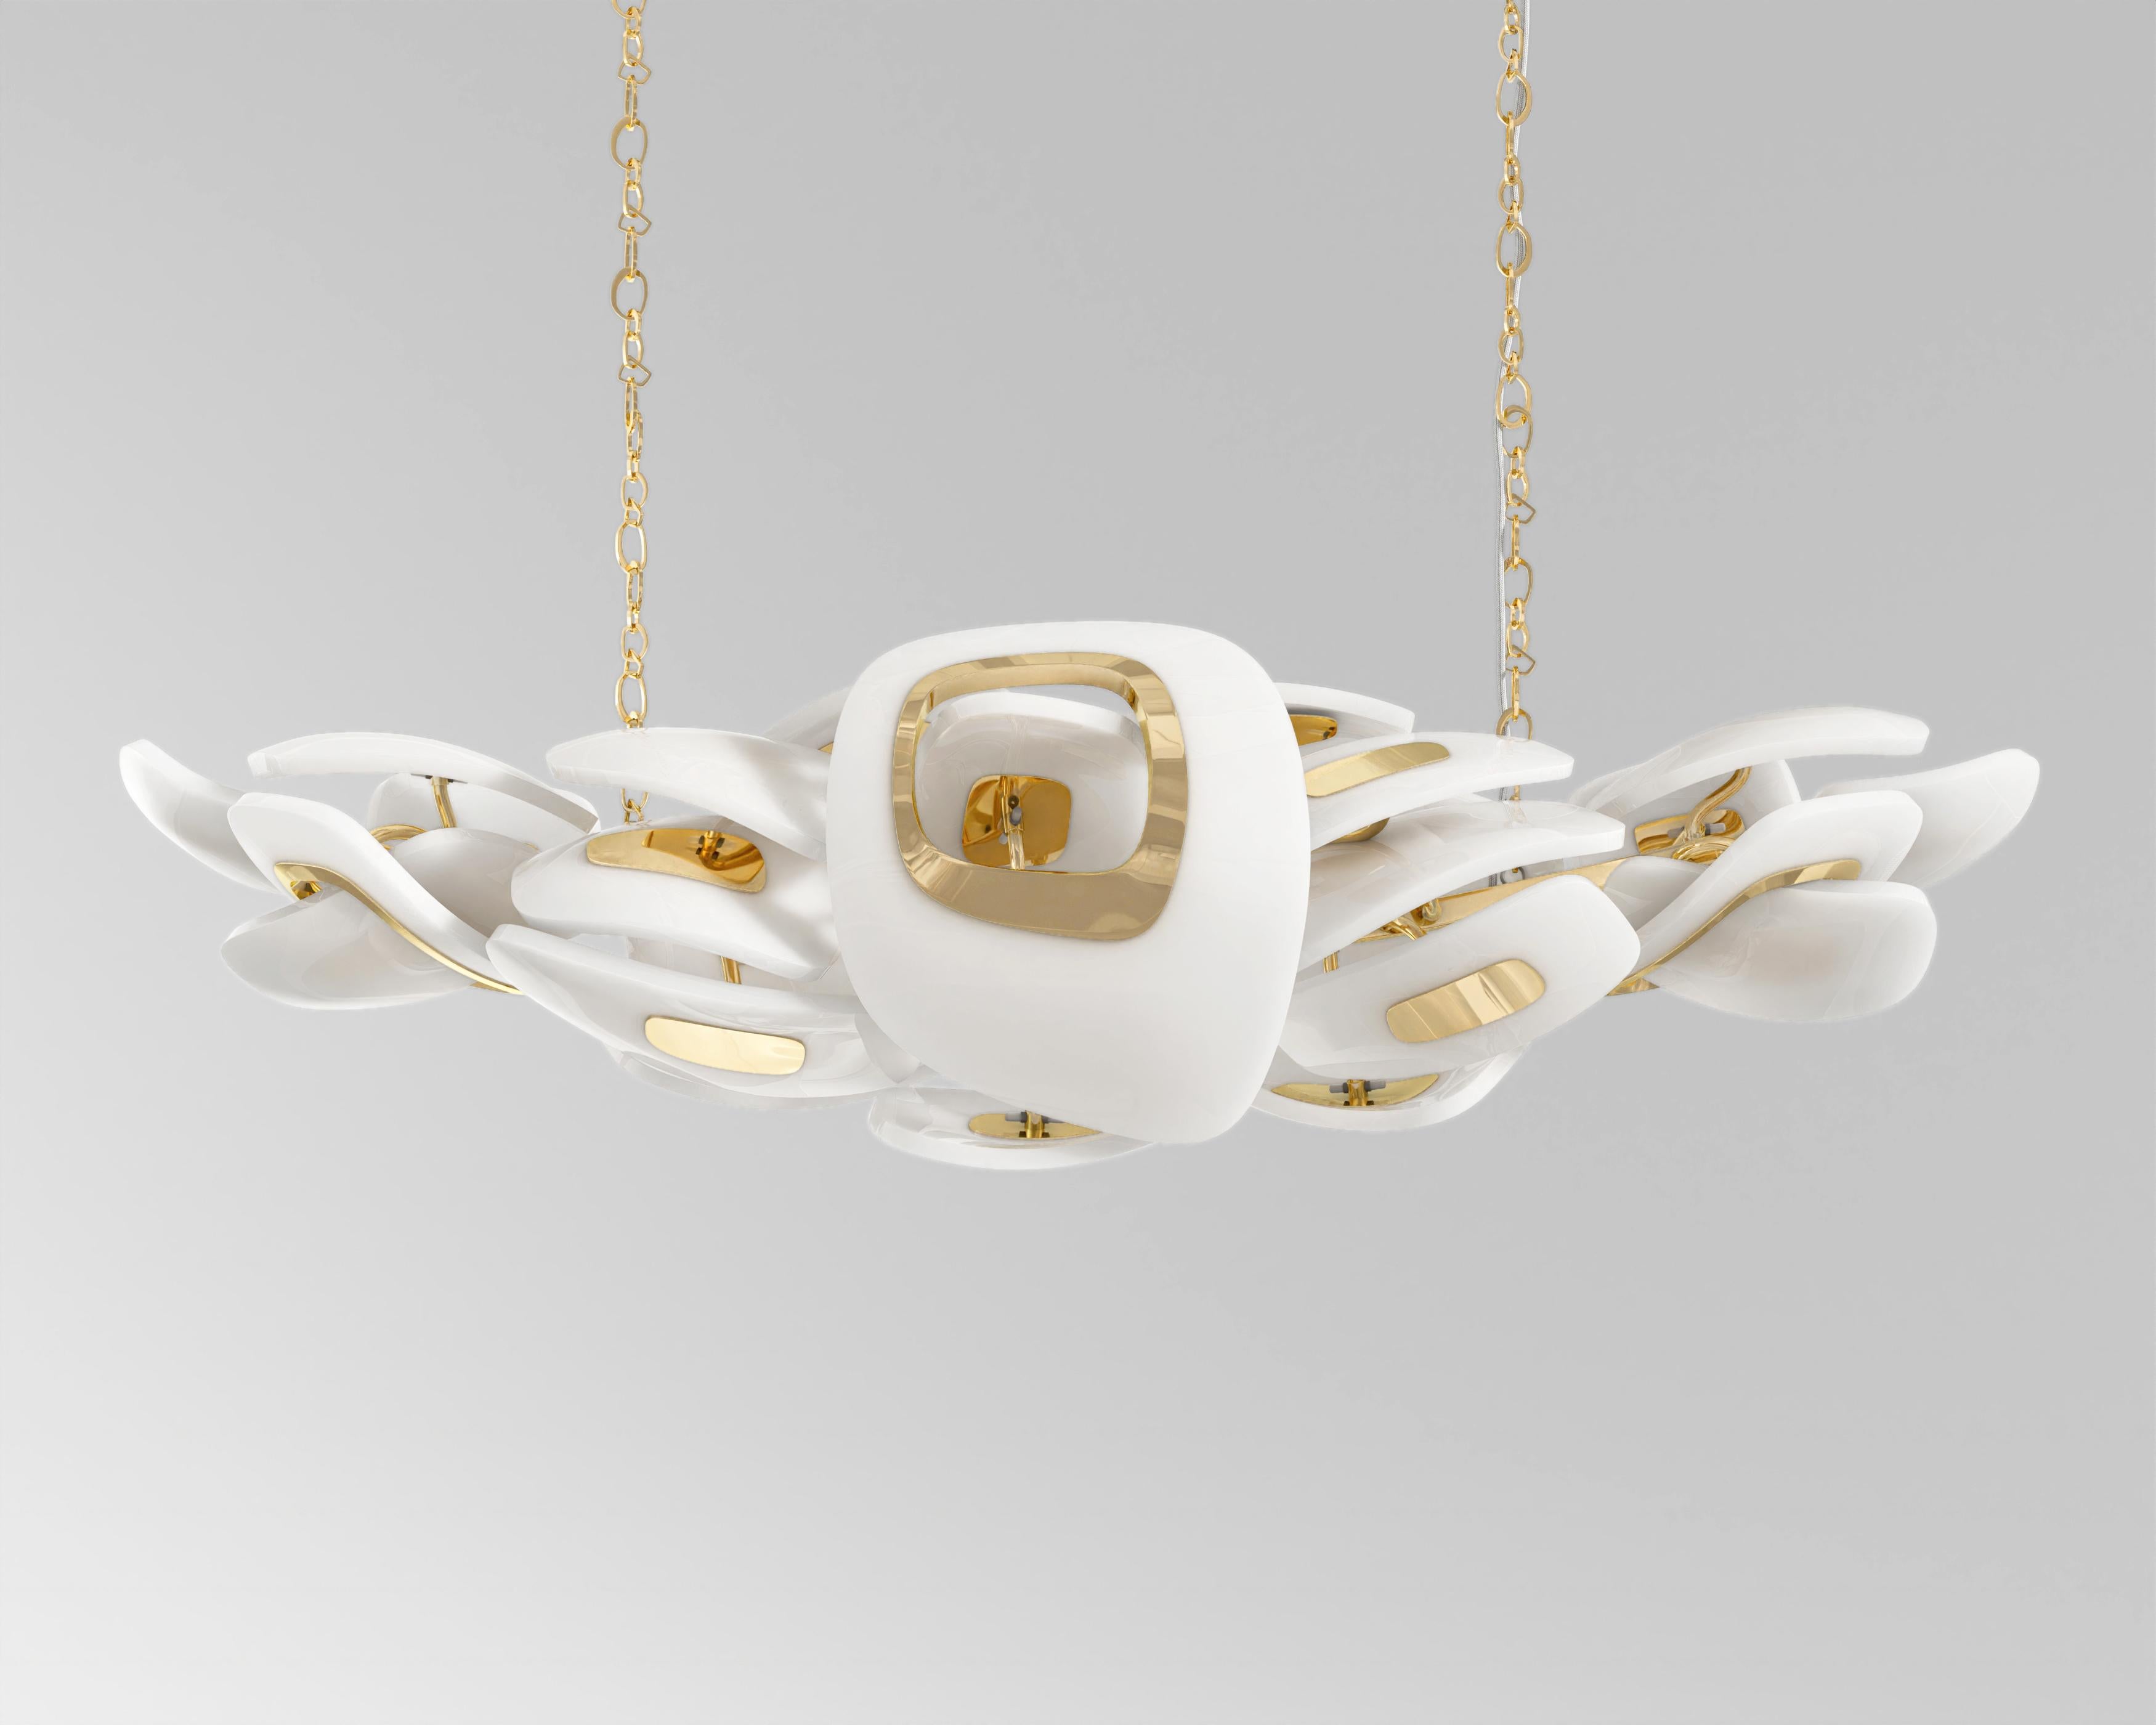 Swan Polished Bronze

Picture yourself walking into a room and there it stands, Palena Furniture Swan Chandelier. It has the illusion as if everything is not real, with soft milky glass shades for its arms, which are reminiscent of swan wings gently